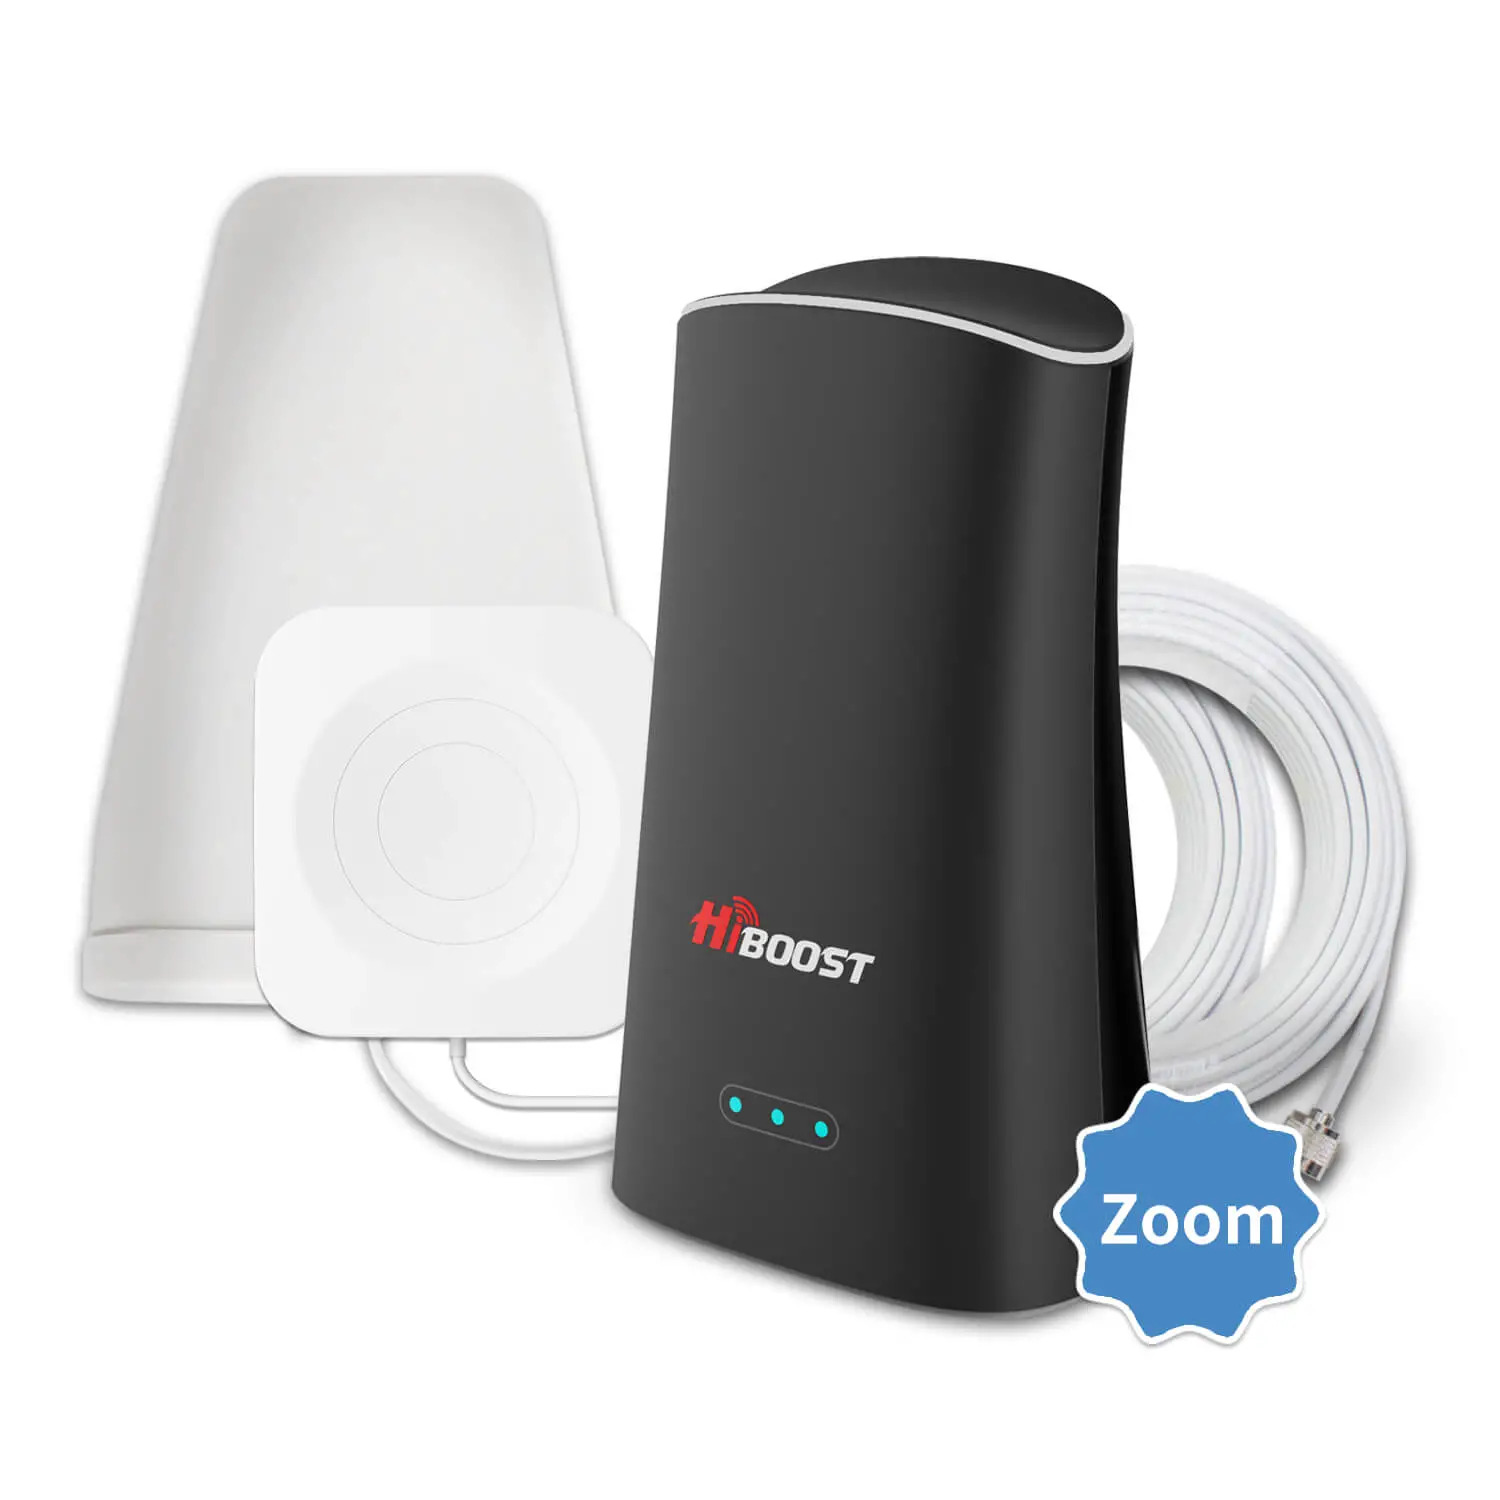 HiBoost 3-Band Cell Phone Signal Booster Up to 1,000 sq ft for Home & Office,Boosts Band 12/17/13/5, 3G 4G LTE Voice and Data for Verizon,T-Mobile, AT&T,Cellular Repeater Amplifier Kits